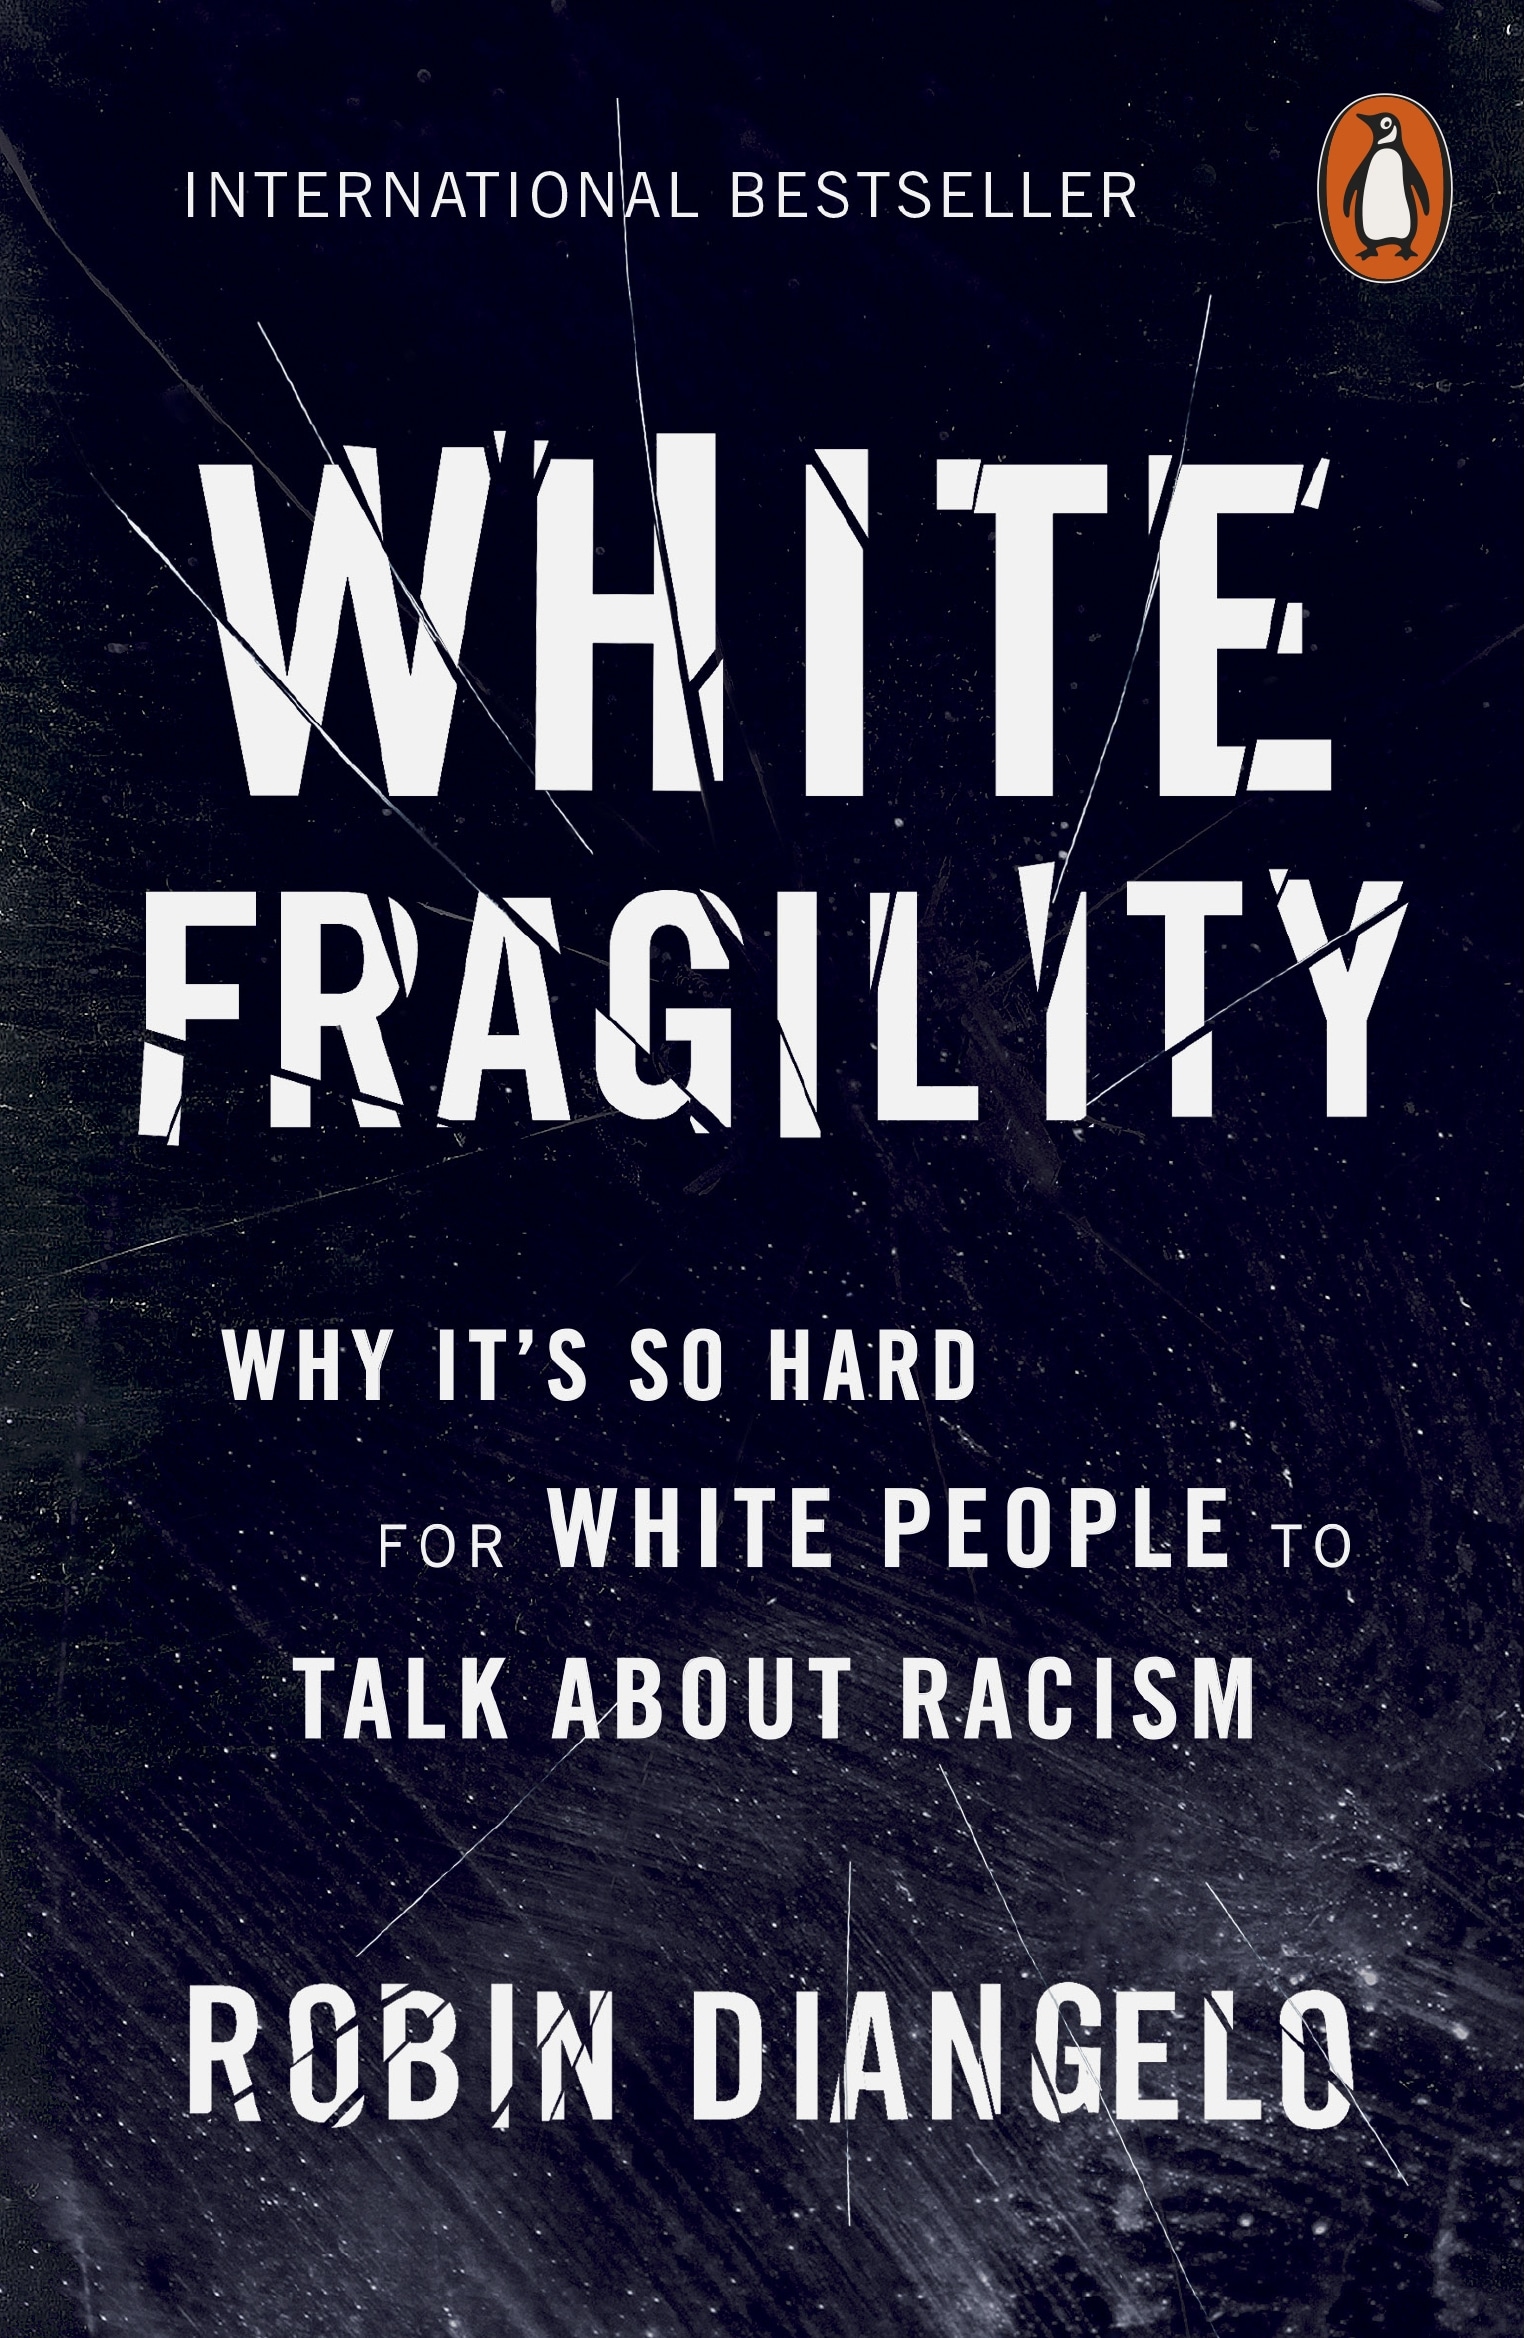 Book “White Fragility” by Robin DiAngelo — February 7, 2019